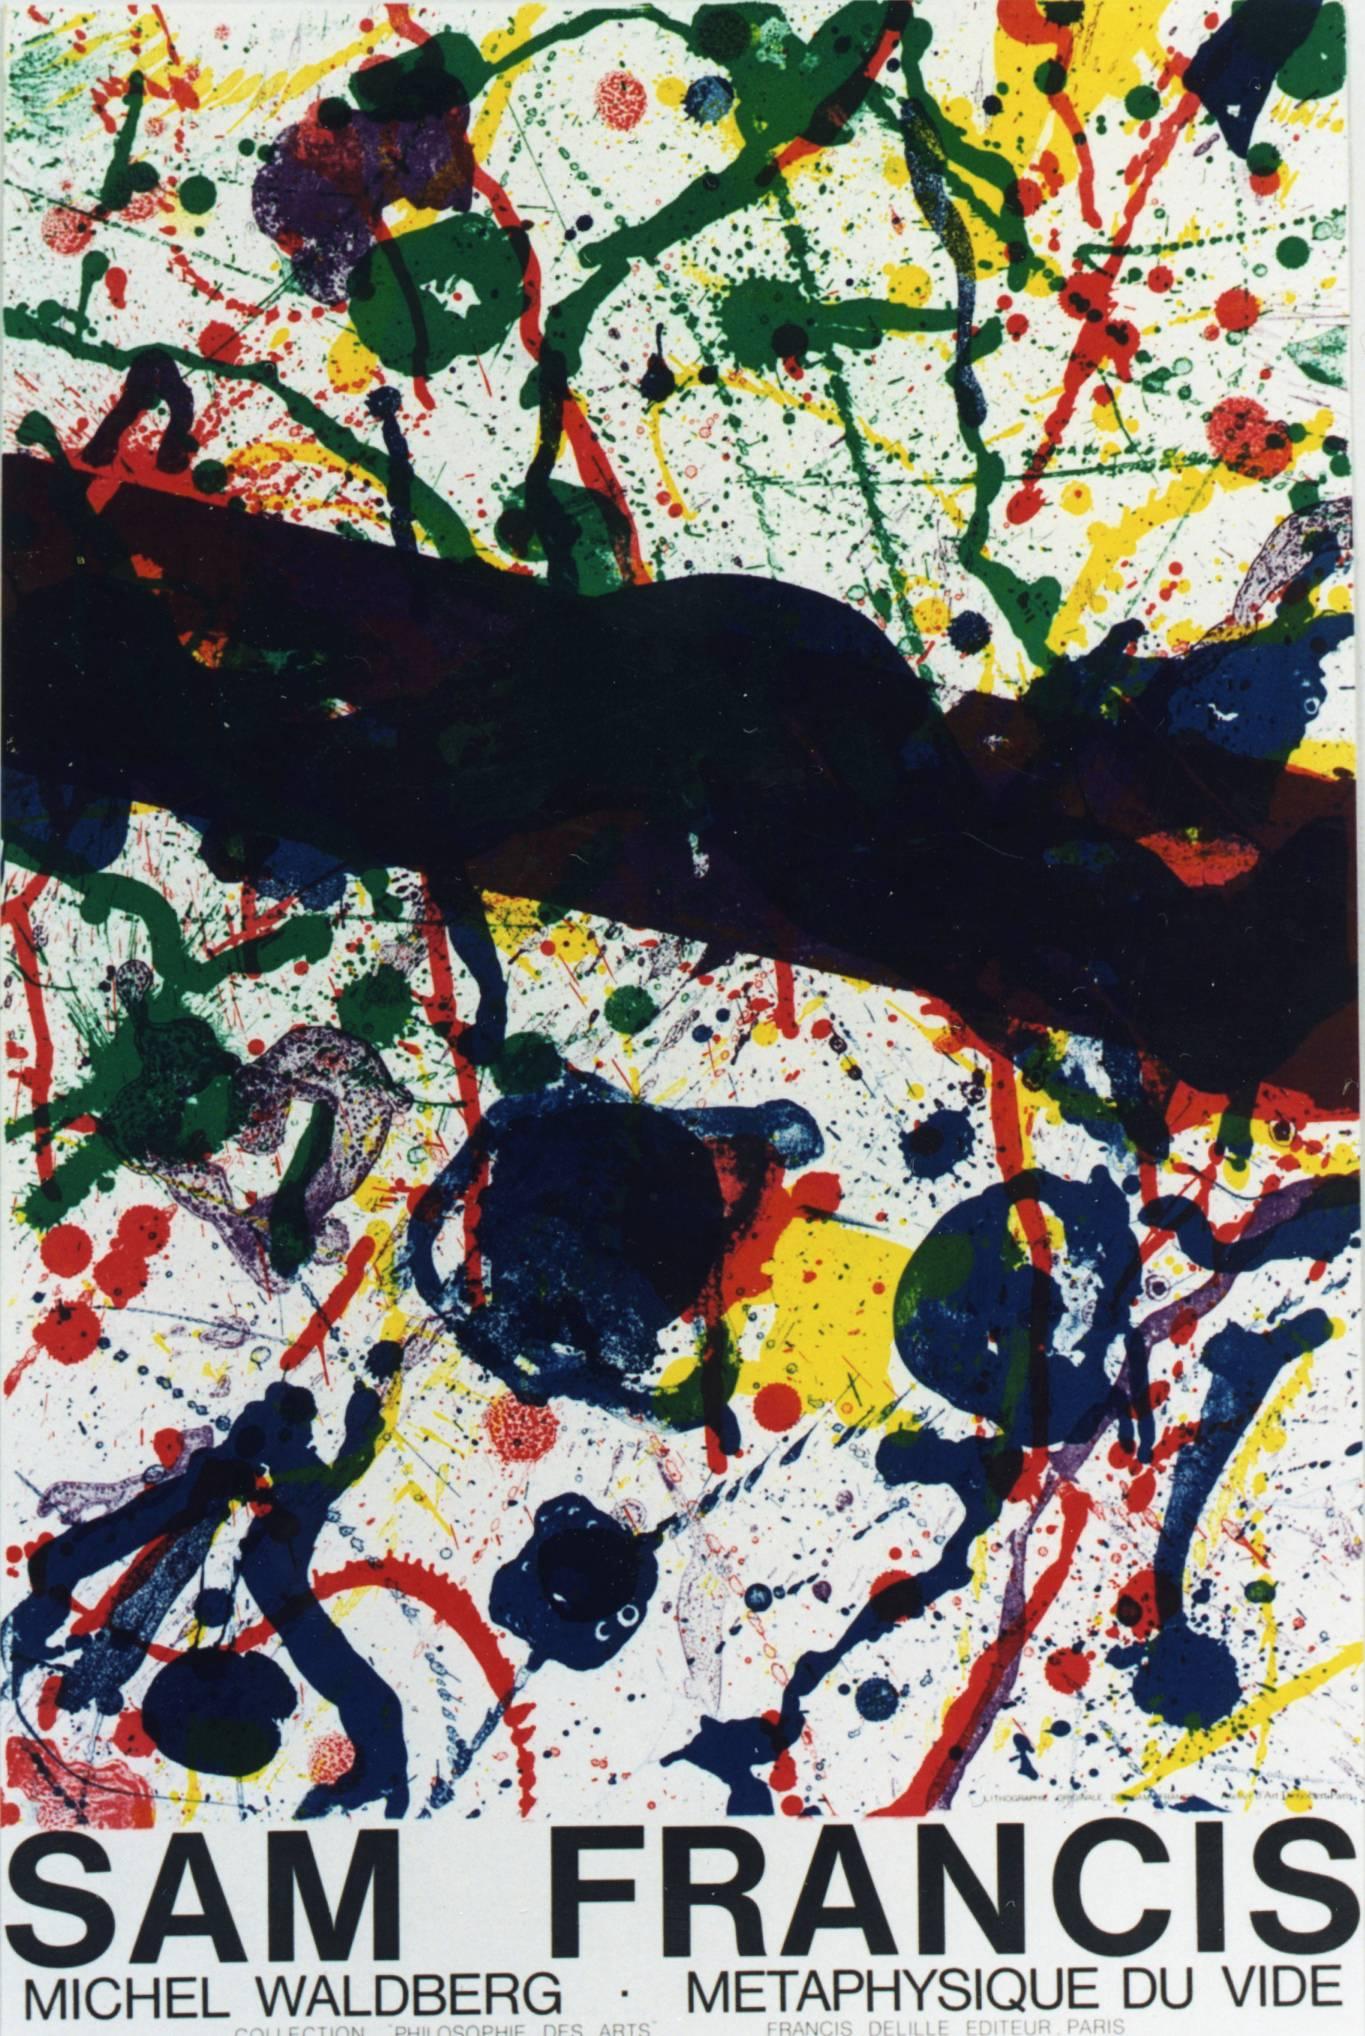 Sam Francis Abstract Print -  Exhibition Poster for Metaphysique de vide - Michel Waldberg 